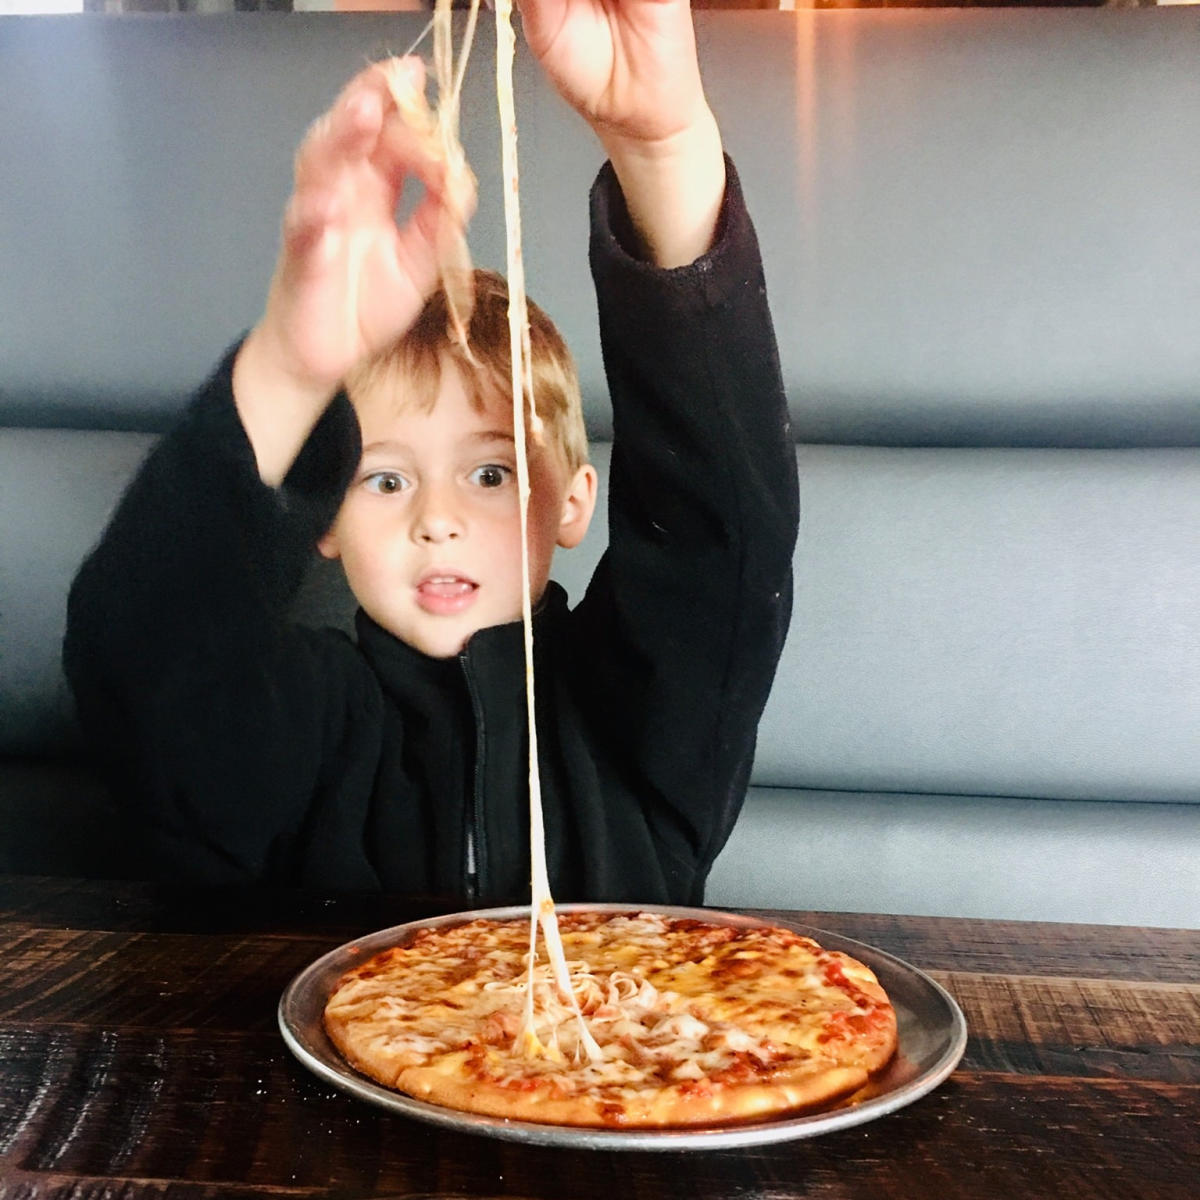 Boy pulling cheese pizza at Crust